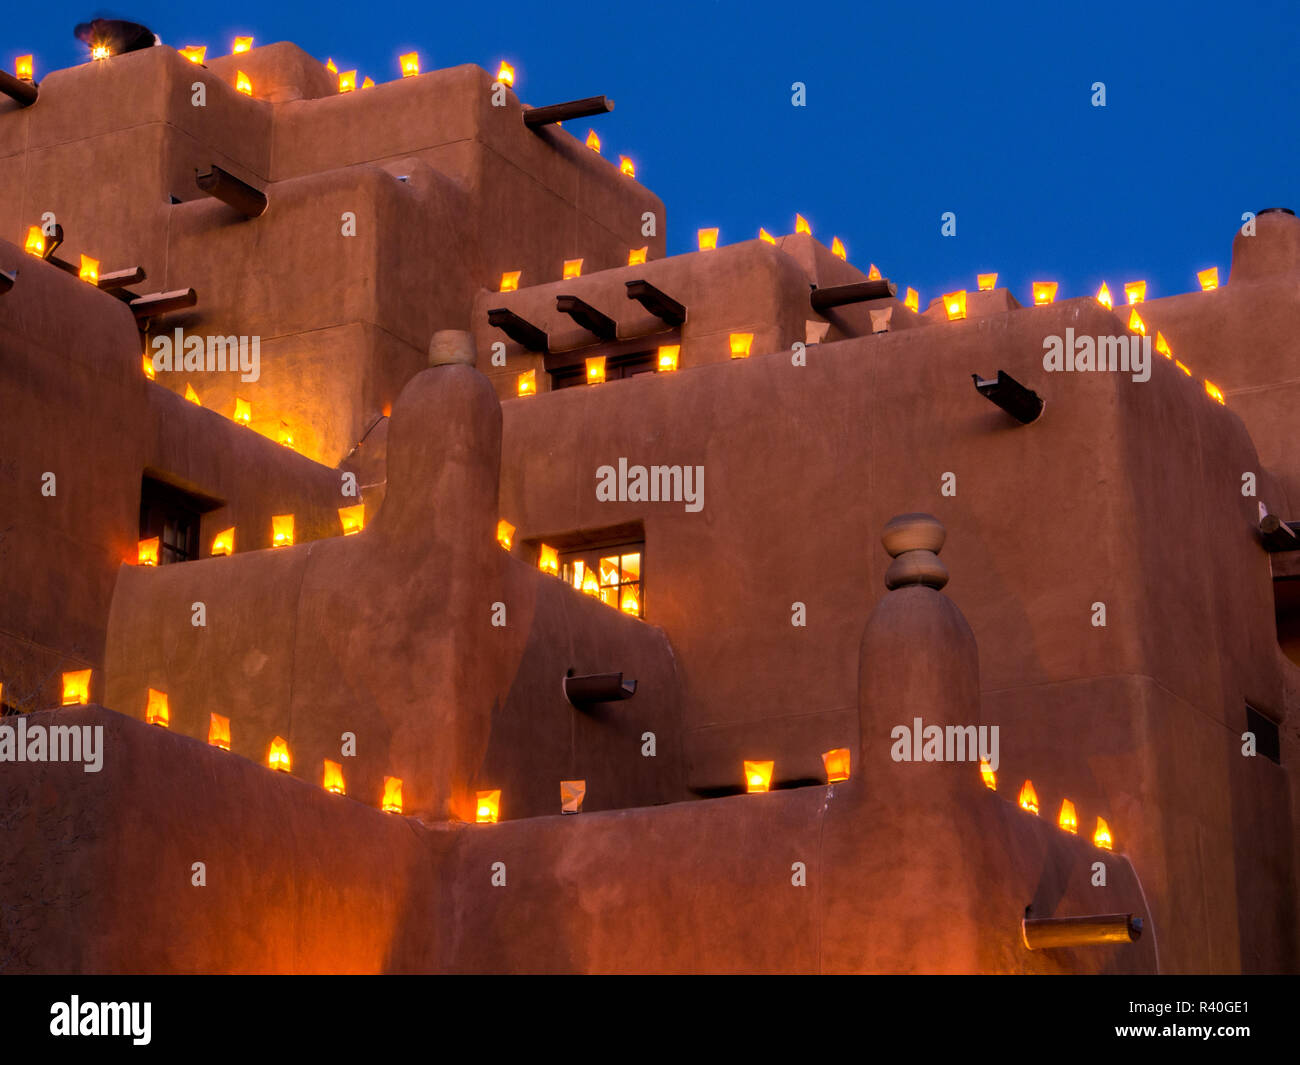 USA, New Mexico, Sant Fe, Adobe structure with protruding vigas and Soft Lights Stock Photo